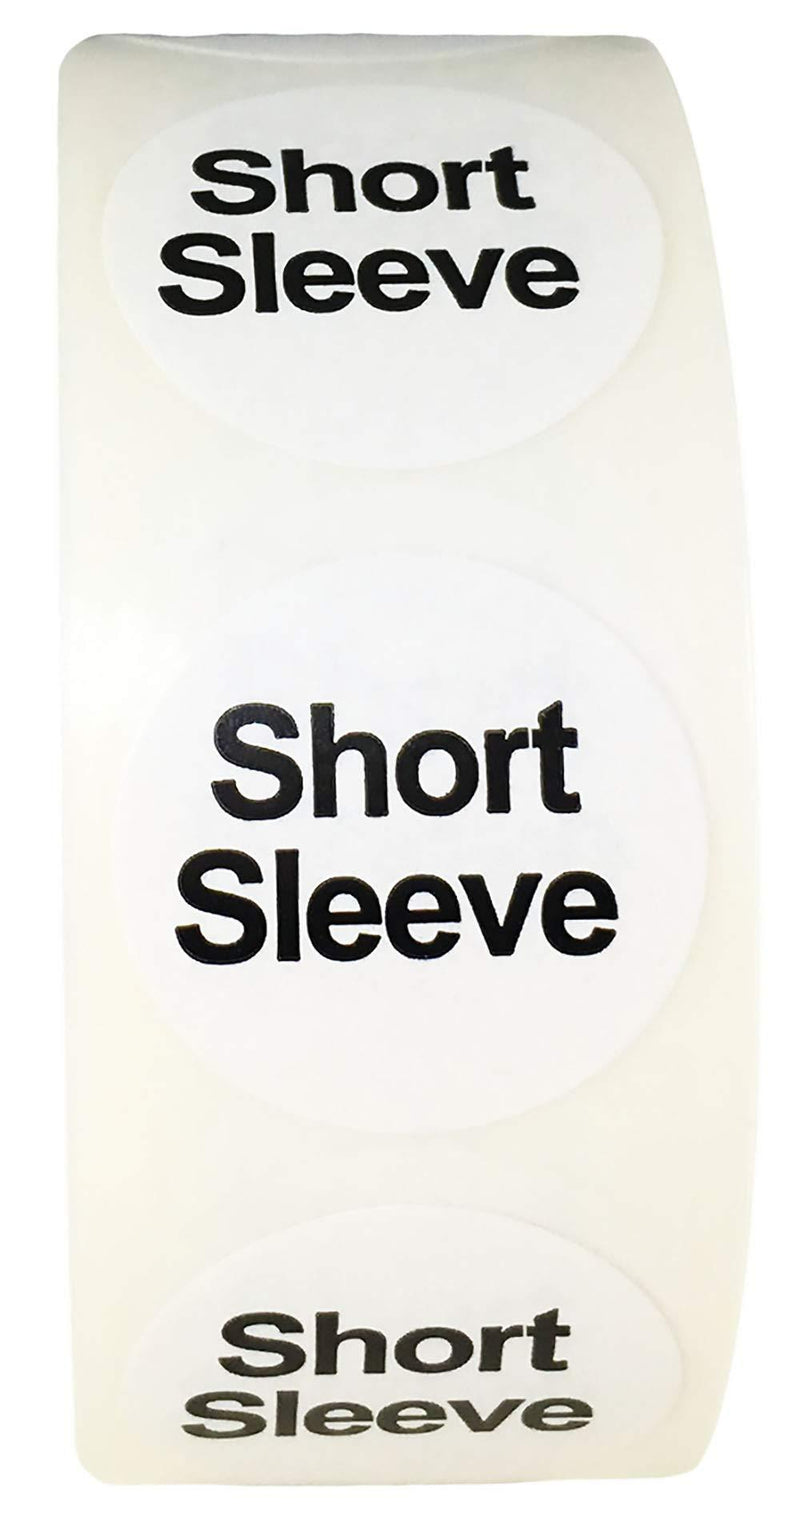 White Circle Short Sleeve Clothing Size Stickers for Retail Apparel 0.75 Inch 500 Total Adhesive Labels